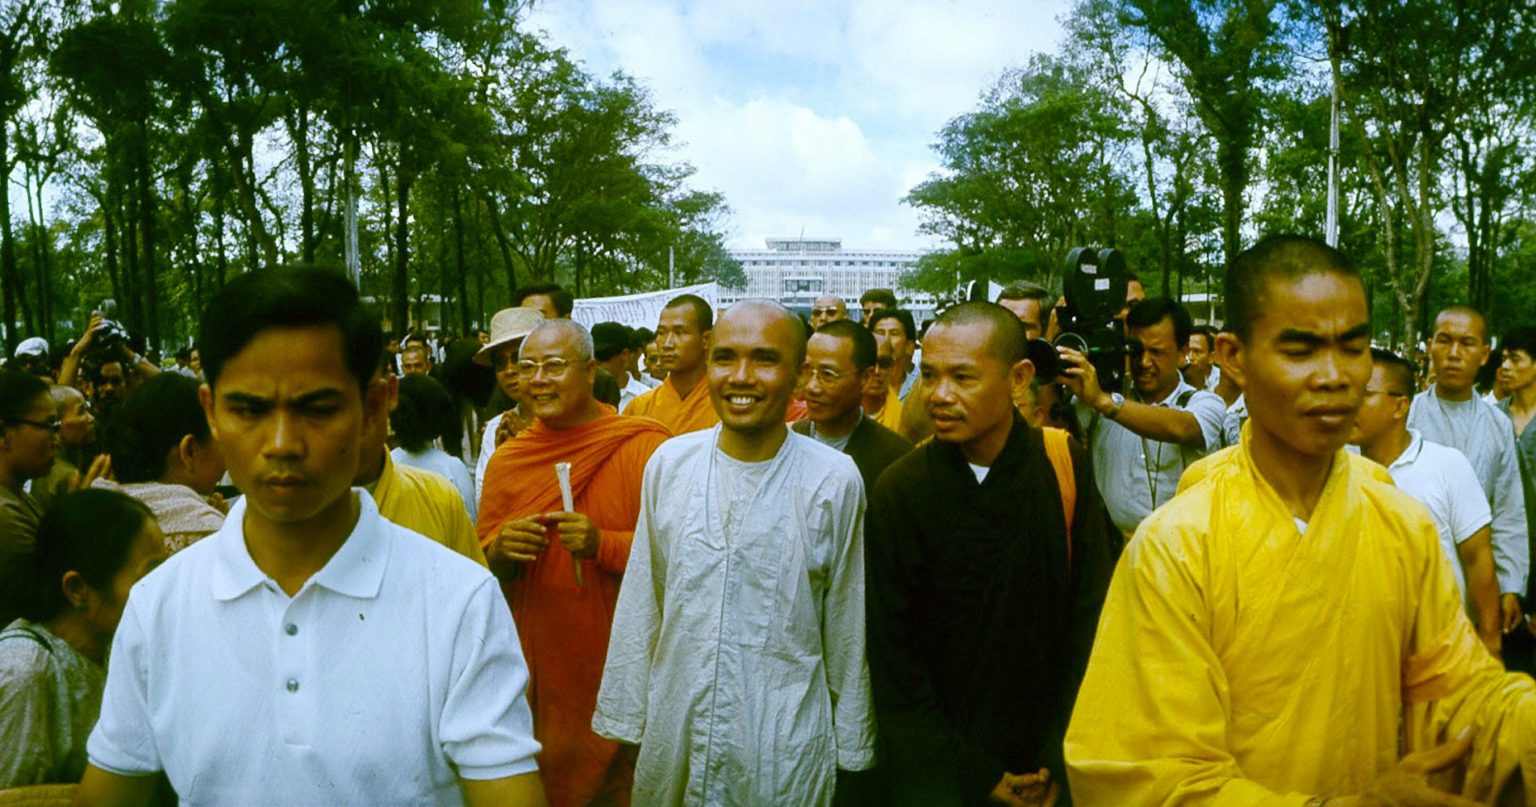 1967 Demonstrations In Saigon Buddhist March by Co Rentmeester 1536x807